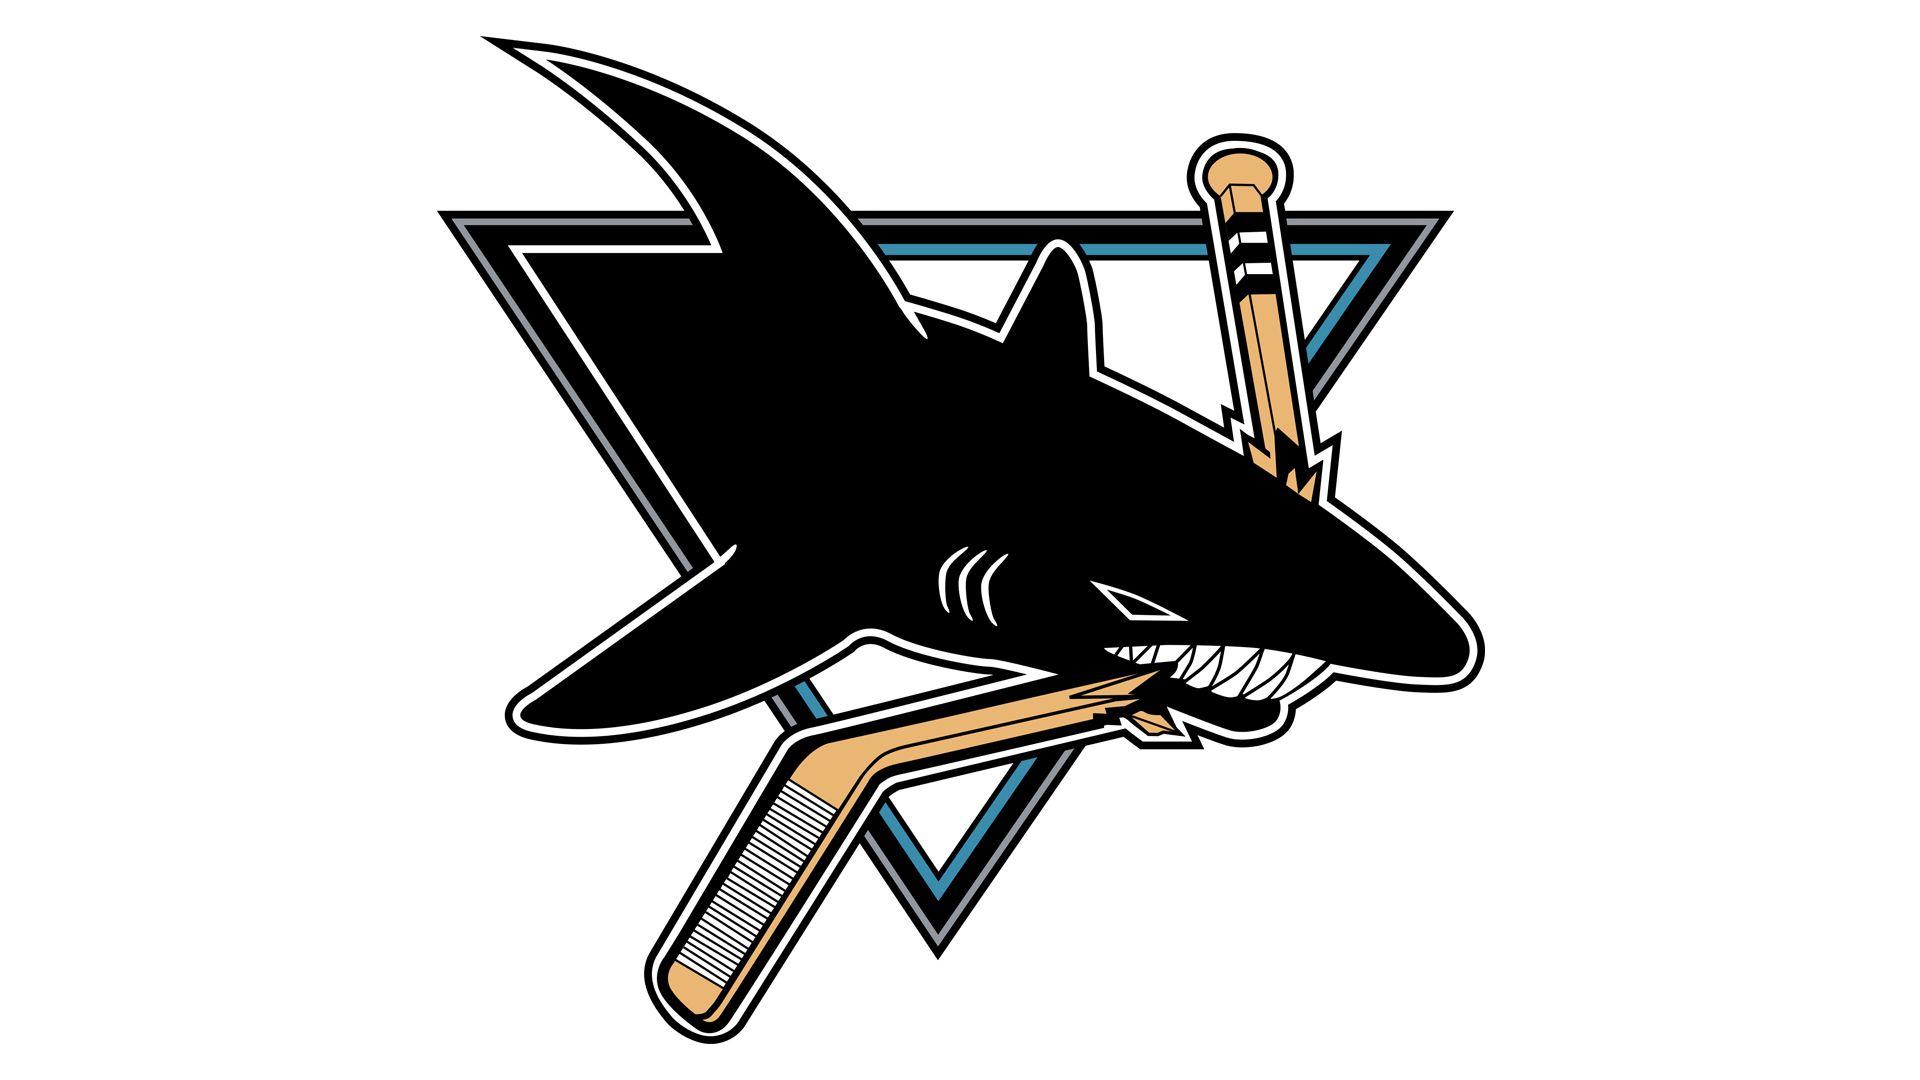 San Jose Sharks Logo - San Jose Sharks Logo, San Jose Sharks Symbol, Meaning, History and ...